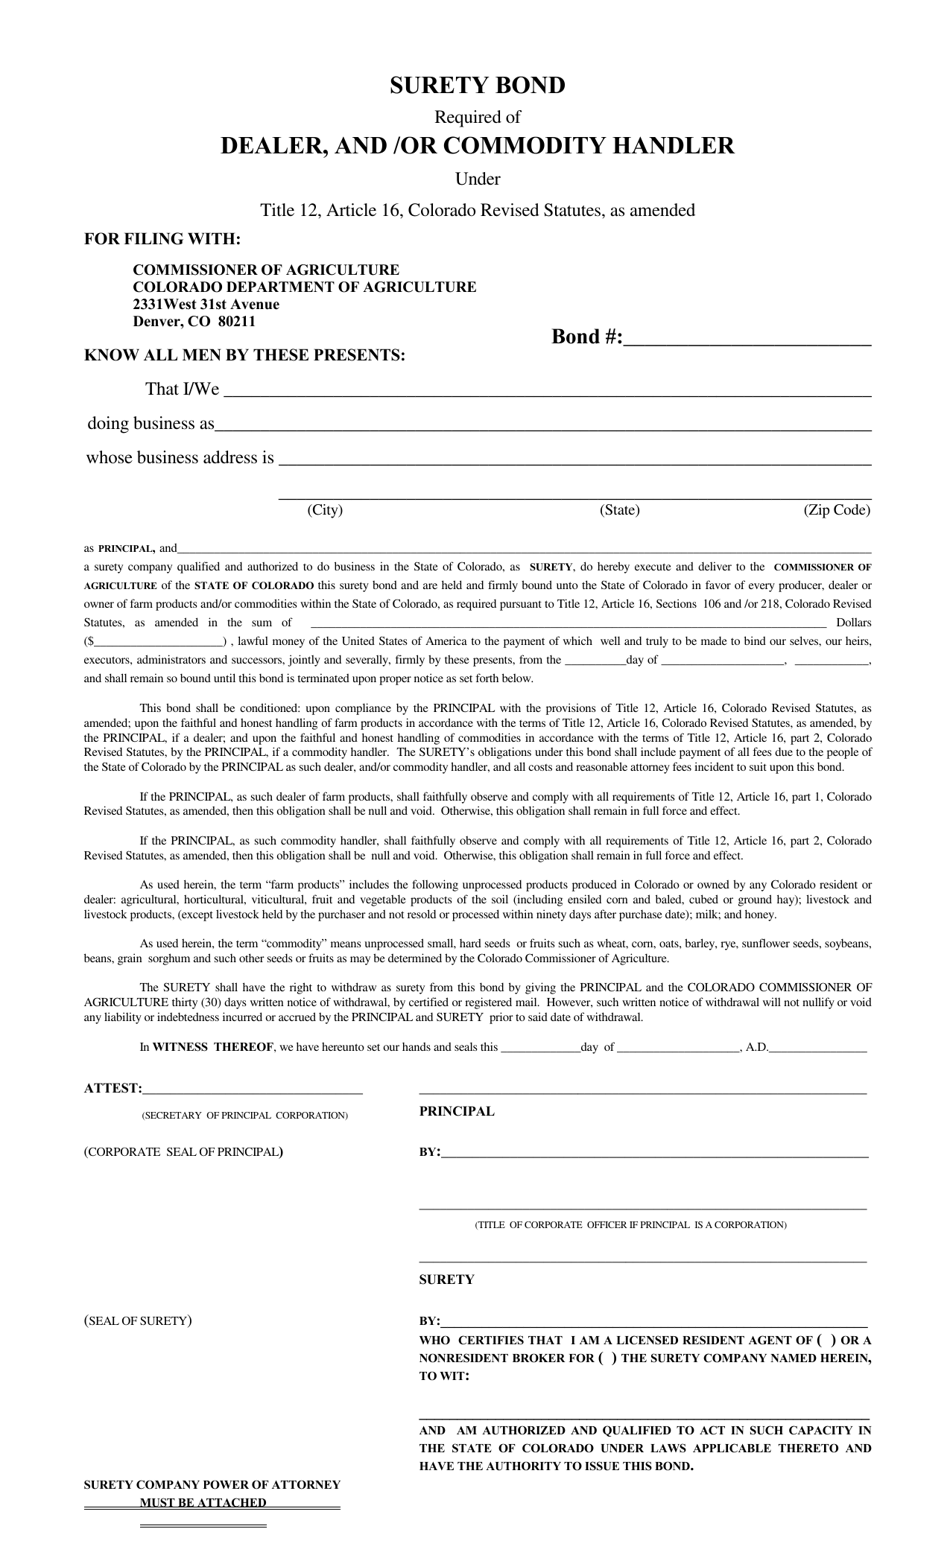 Surety Bond Required of Dealer, and / Or Commodity Handler - Colorado, Page 1